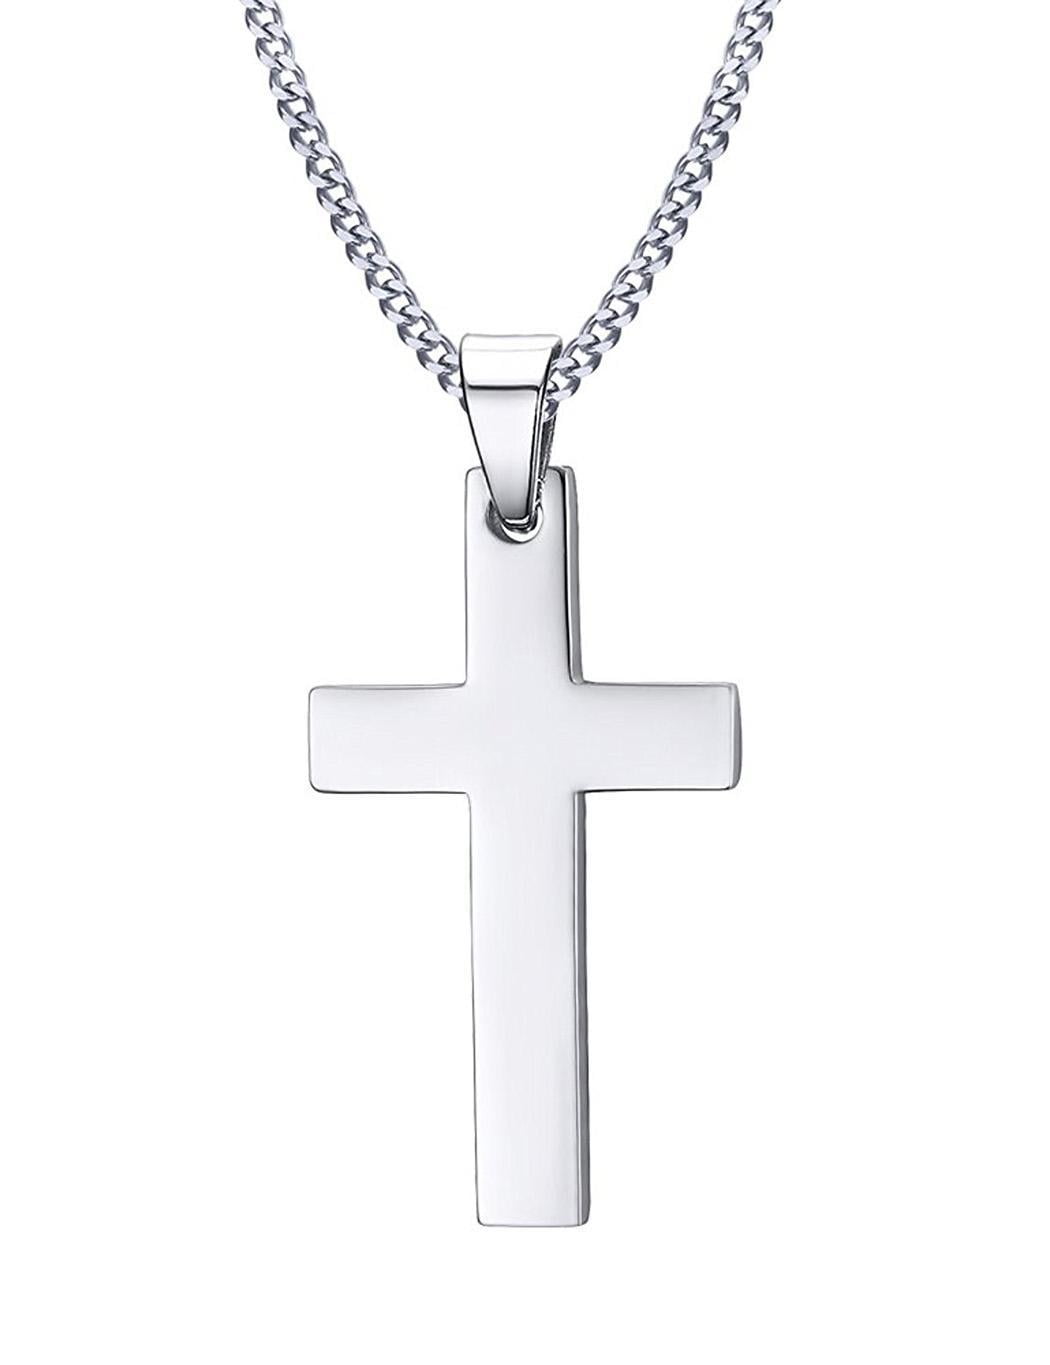 LARGE 2.9" Heavy 925 Sterling Silver Crucifix Cross with Jesus Pendant Necklace 